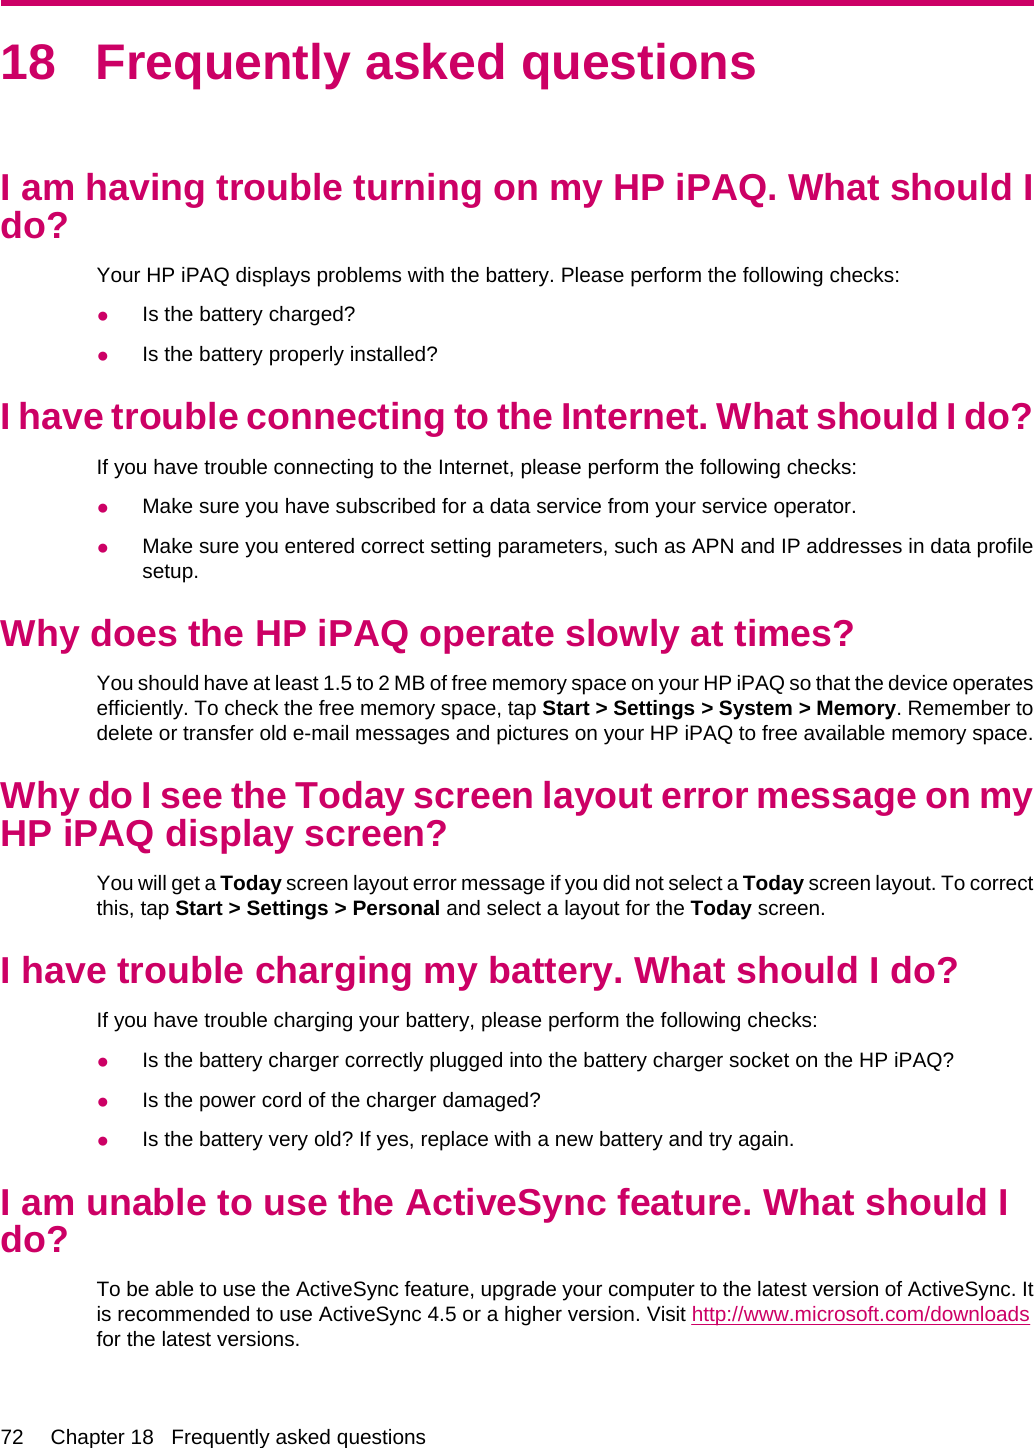 18 Frequently asked questionsI am having trouble turning on my HP iPAQ. What should Ido?Your HP iPAQ displays problems with the battery. Please perform the following checks:●Is the battery charged?●Is the battery properly installed?I have trouble connecting to the Internet. What should I do?If you have trouble connecting to the Internet, please perform the following checks:●Make sure you have subscribed for a data service from your service operator.●Make sure you entered correct setting parameters, such as APN and IP addresses in data profilesetup.Why does the HP iPAQ operate slowly at times?You should have at least 1.5 to 2 MB of free memory space on your HP iPAQ so that the device operatesefficiently. To check the free memory space, tap Start &gt; Settings &gt; System &gt; Memory. Remember todelete or transfer old e-mail messages and pictures on your HP iPAQ to free available memory space.Why do I see the Today screen layout error message on myHP iPAQ display screen?You will get a Today screen layout error message if you did not select a Today screen layout. To correctthis, tap Start &gt; Settings &gt; Personal and select a layout for the Today screen.I have trouble charging my battery. What should I do?If you have trouble charging your battery, please perform the following checks:●Is the battery charger correctly plugged into the battery charger socket on the HP iPAQ?●Is the power cord of the charger damaged?●Is the battery very old? If yes, replace with a new battery and try again.I am unable to use the ActiveSync feature. What should Ido?To be able to use the ActiveSync feature, upgrade your computer to the latest version of ActiveSync. Itis recommended to use ActiveSync 4.5 or a higher version. Visit http://www.microsoft.com/downloadsfor the latest versions.72 Chapter 18   Frequently asked questions